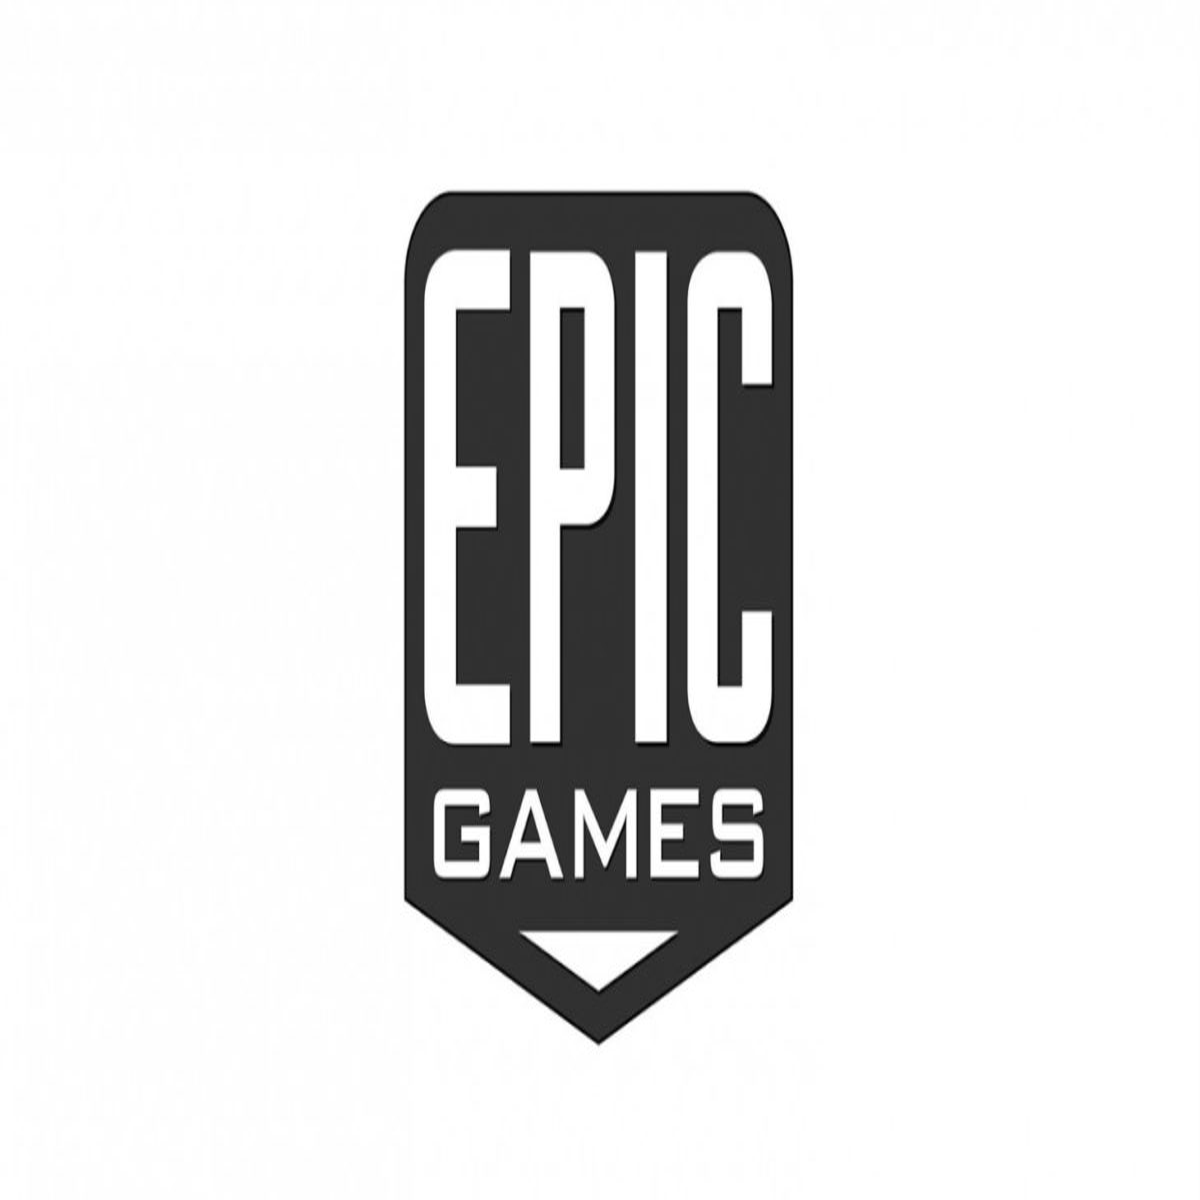 Epic Games Careers, Jobs and Employment Opportunity - Epic Games